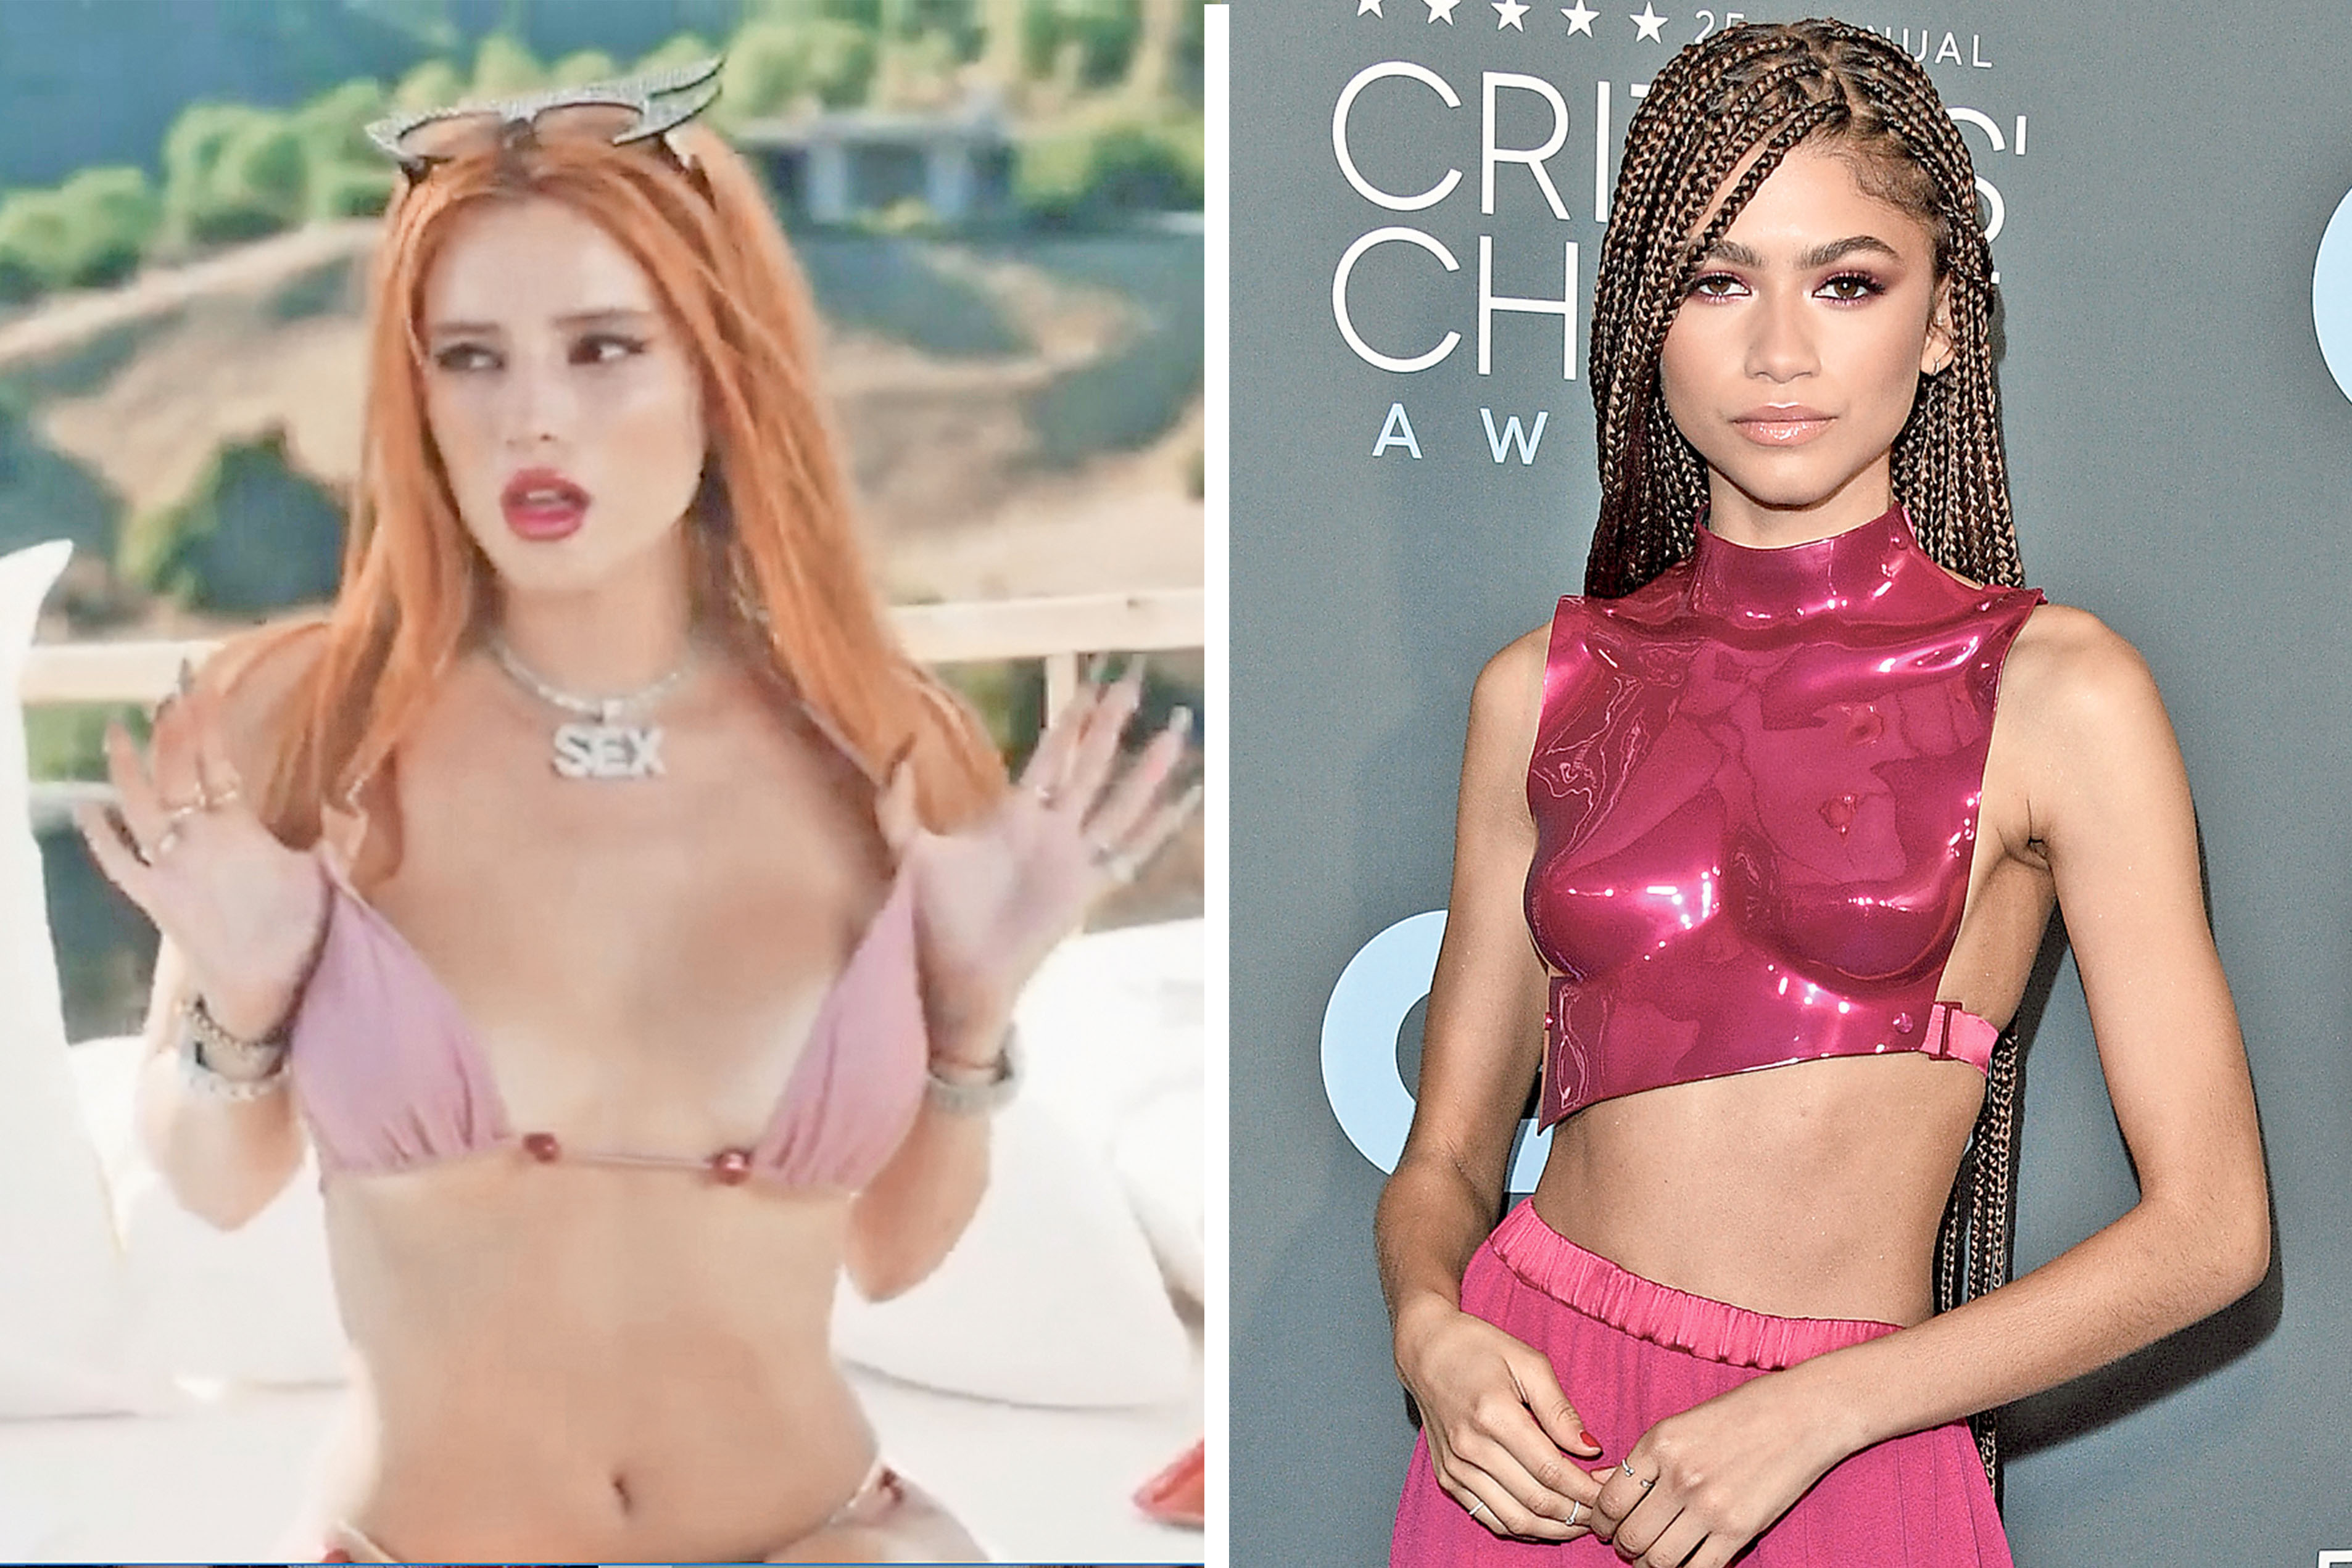 asif alam recommends zendaya and bella naked pic